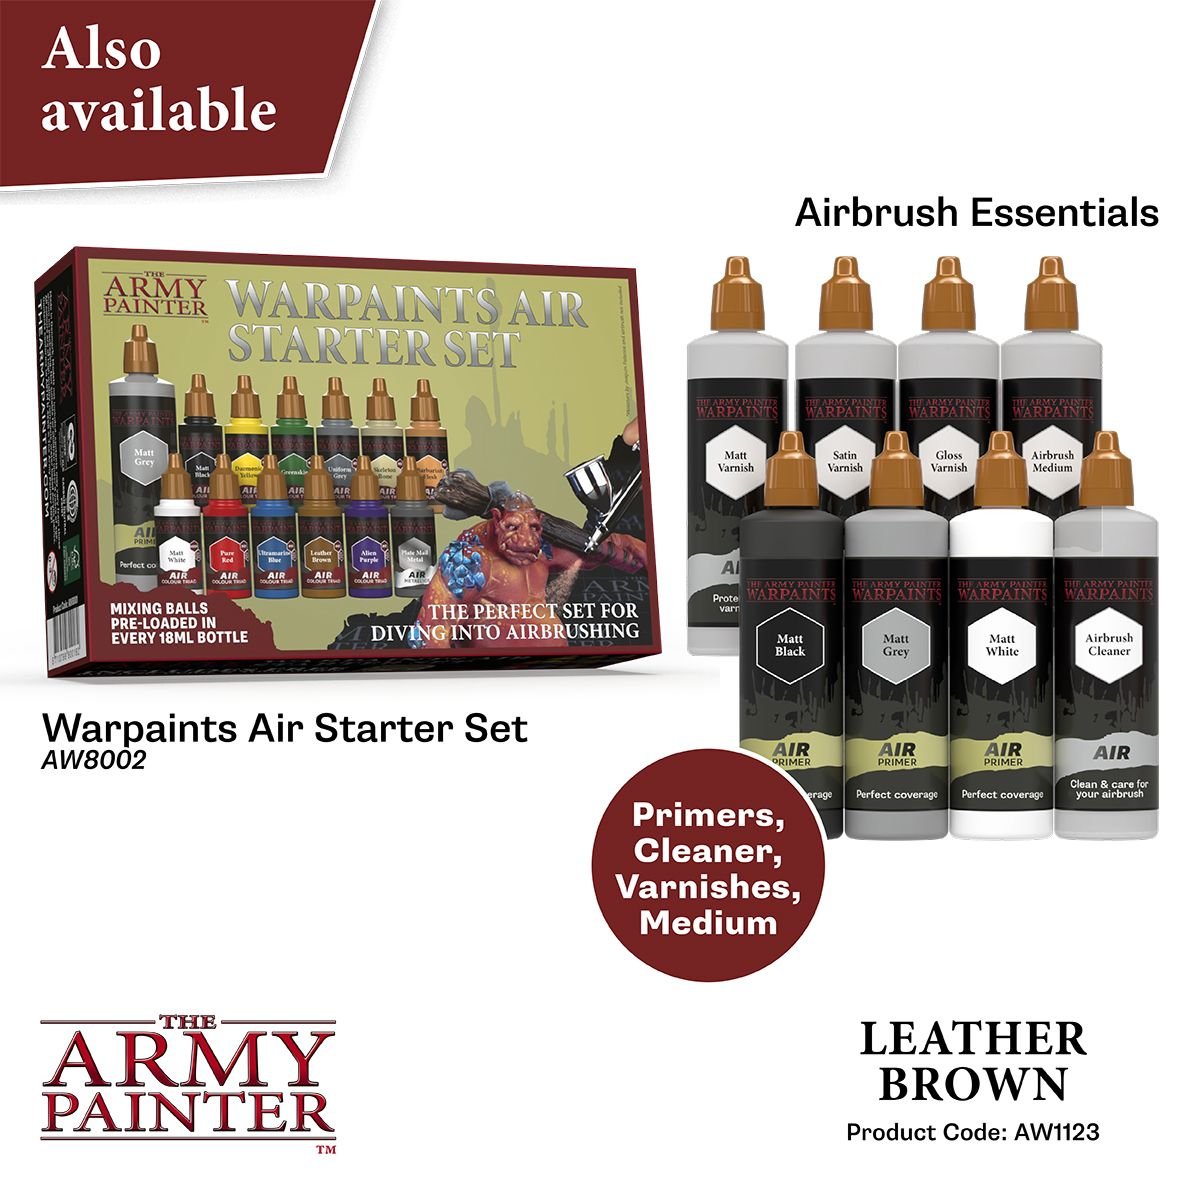 The Army Painter - Warpaints Air: Leather Brown (18ml/0.6oz)